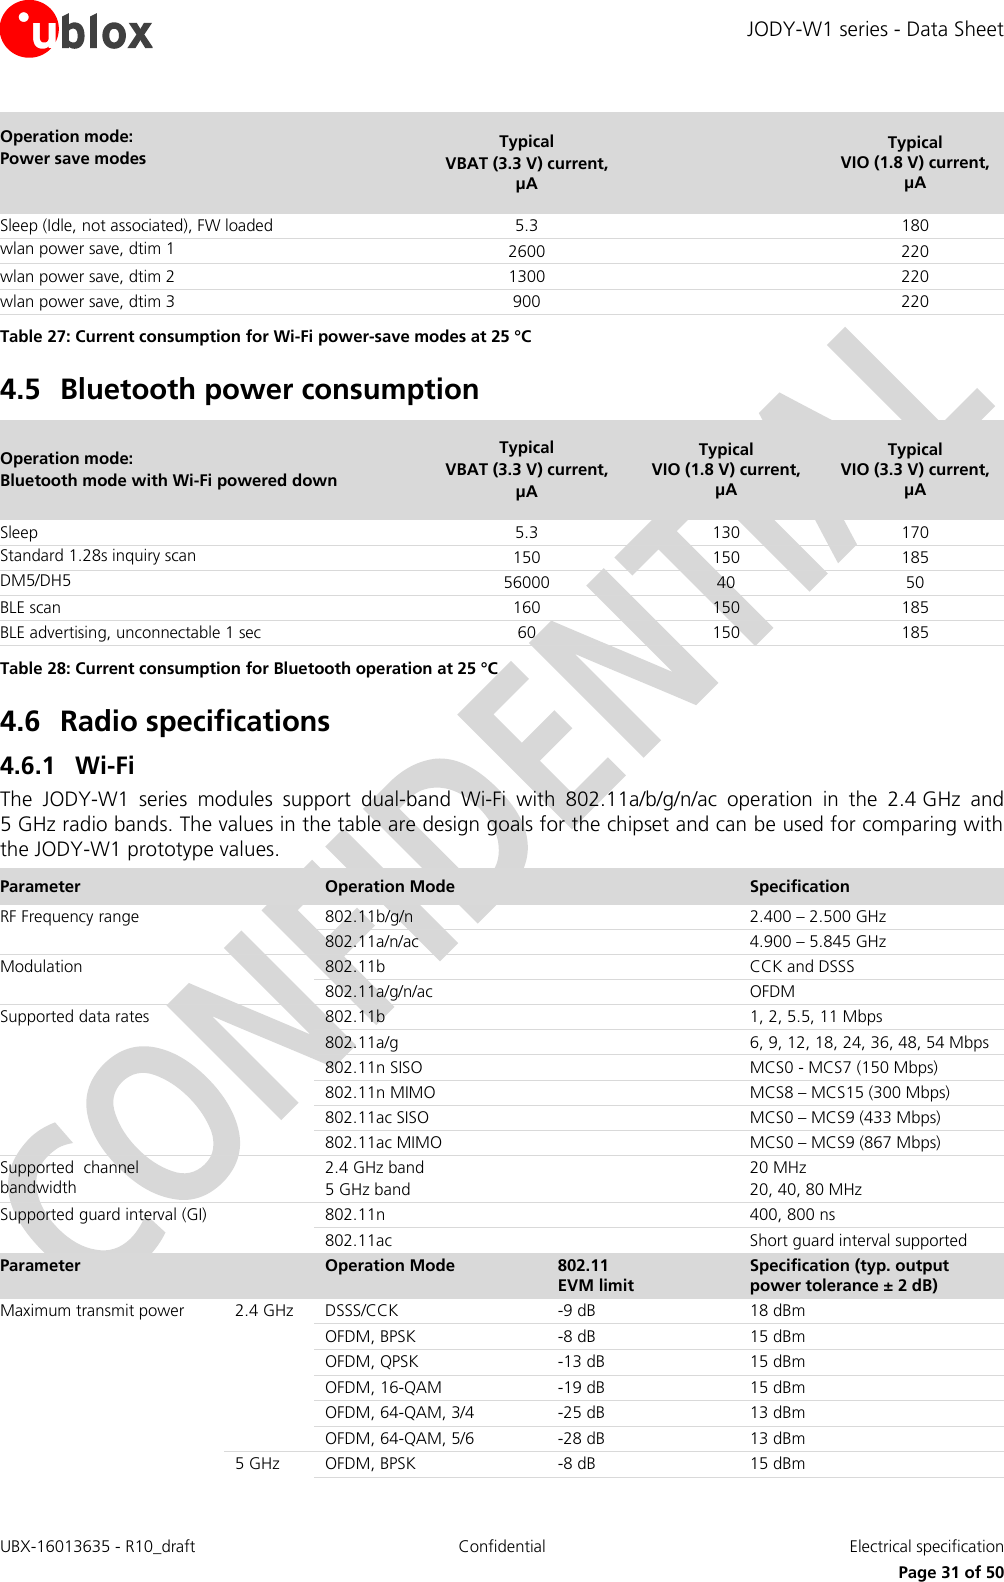 JODY-W1 series - Data Sheet UBX-16013635 - R10_draft Confidential  Electrical specification     Page 31 of 50 Operation mode:  Power save modes Typical VBAT (3.3 V) current, µA  Typical VIO (1.8 V) current, µA  Sleep (Idle, not associated), FW loaded 5.3  180 wlan power save, dtim 1 2600  220 wlan power save, dtim 2 1300  220 wlan power save, dtim 3 900  220 Table 27: Current consumption for Wi-Fi power-save modes at 25 °C 4.5 Bluetooth power consumption Operation mode:  Bluetooth mode with Wi-Fi powered down Typical VBAT (3.3 V) current, µA Typical VIO (1.8 V) current, µA Typical VIO (3.3 V) current, µA Sleep 5.3 130 170 Standard 1.28s inquiry scan 150 150 185 DM5/DH5 56000 40 50 BLE scan 160 150 185 BLE advertising, unconnectable 1 sec 60 150 185 Table 28: Current consumption for Bluetooth operation at 25 °C 4.6 Radio specifications 4.6.1 Wi-Fi The  JODY-W1  series  modules  support  dual-band  Wi-Fi  with  802.11a/b/g/n/ac  operation  in  the  2.4 GHz  and  5 GHz radio bands. The values in the table are design goals for the chipset and can be used for comparing with the JODY-W1 prototype values. Parameter Operation Mode Specification RF Frequency range  802.11b/g/n   2.400 – 2.500 GHz 802.11a/n/ac   4.900 – 5.845 GHz Modulation  802.11b   CCK and DSSS 802.11a/g/n/ac   OFDM Supported data rates  802.11b   1, 2, 5.5, 11 Mbps 802.11a/g   6, 9, 12, 18, 24, 36, 48, 54 Mbps 802.11n SISO   MCS0 - MCS7 (150 Mbps) 802.11n MIMO   MCS8 – MCS15 (300 Mbps) 802.11ac SISO   MCS0 – MCS9 (433 Mbps) 802.11ac MIMO   MCS0 – MCS9 (867 Mbps) Supported  channel bandwidth  2.4 GHz band 5 GHz band   20 MHz 20, 40, 80 MHz Supported guard interval (GI)  802.11n   400, 800 ns 802.11ac   Short guard interval supported Parameter  Operation Mode 802.11 EVM limit  Specification (typ. output power tolerance ± 2 dB) Maximum transmit power 2.4 GHz DSSS/CCK -9 dB  18 dBm OFDM, BPSK -8 dB  15 dBm OFDM, QPSK -13 dB  15 dBm OFDM, 16-QAM -19 dB  15 dBm OFDM, 64-QAM, 3/4  -25 dB  13 dBm OFDM, 64-QAM, 5/6 -28 dB  13 dBm 5 GHz OFDM, BPSK -8 dB  15 dBm 